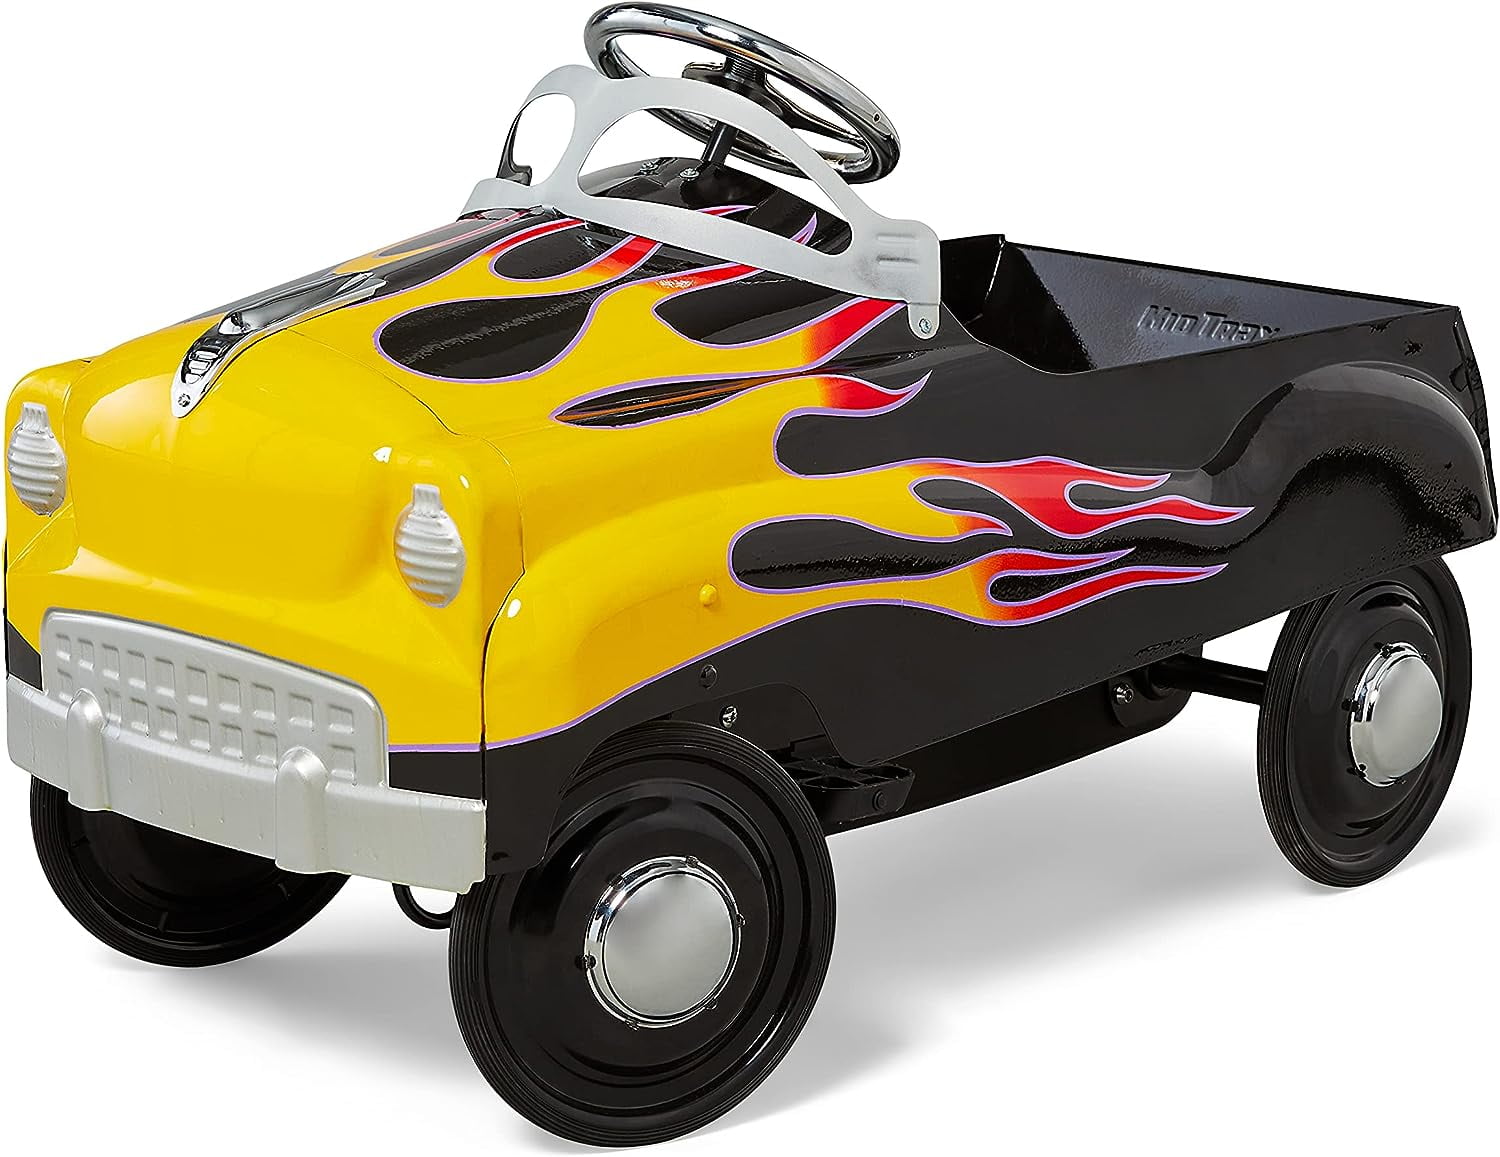 Kid Trax Toddler Classic Pedal Car, Kids 3-5 Years Old, Max Weight